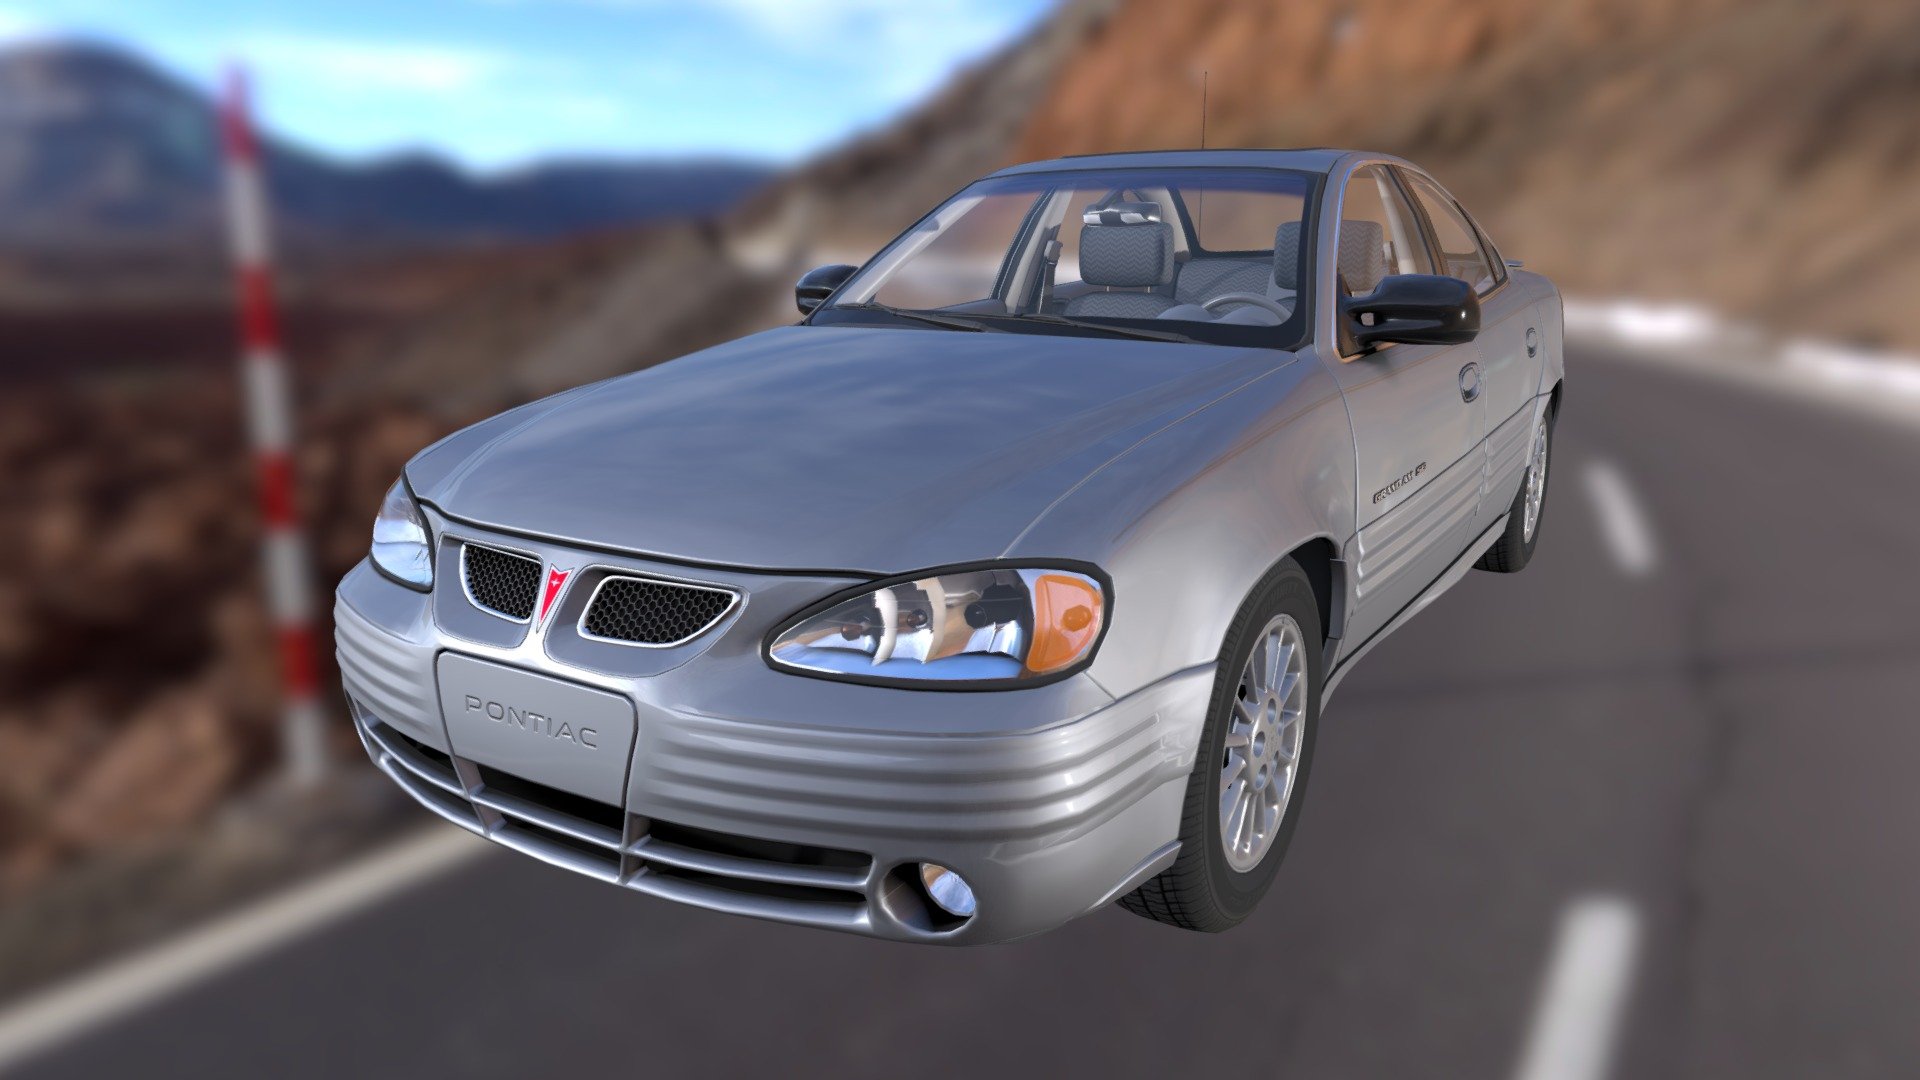 This is a game ready model of a 2001 Pontiac Grand Am. Clean version.

Built on the GM &ldquo;N-body